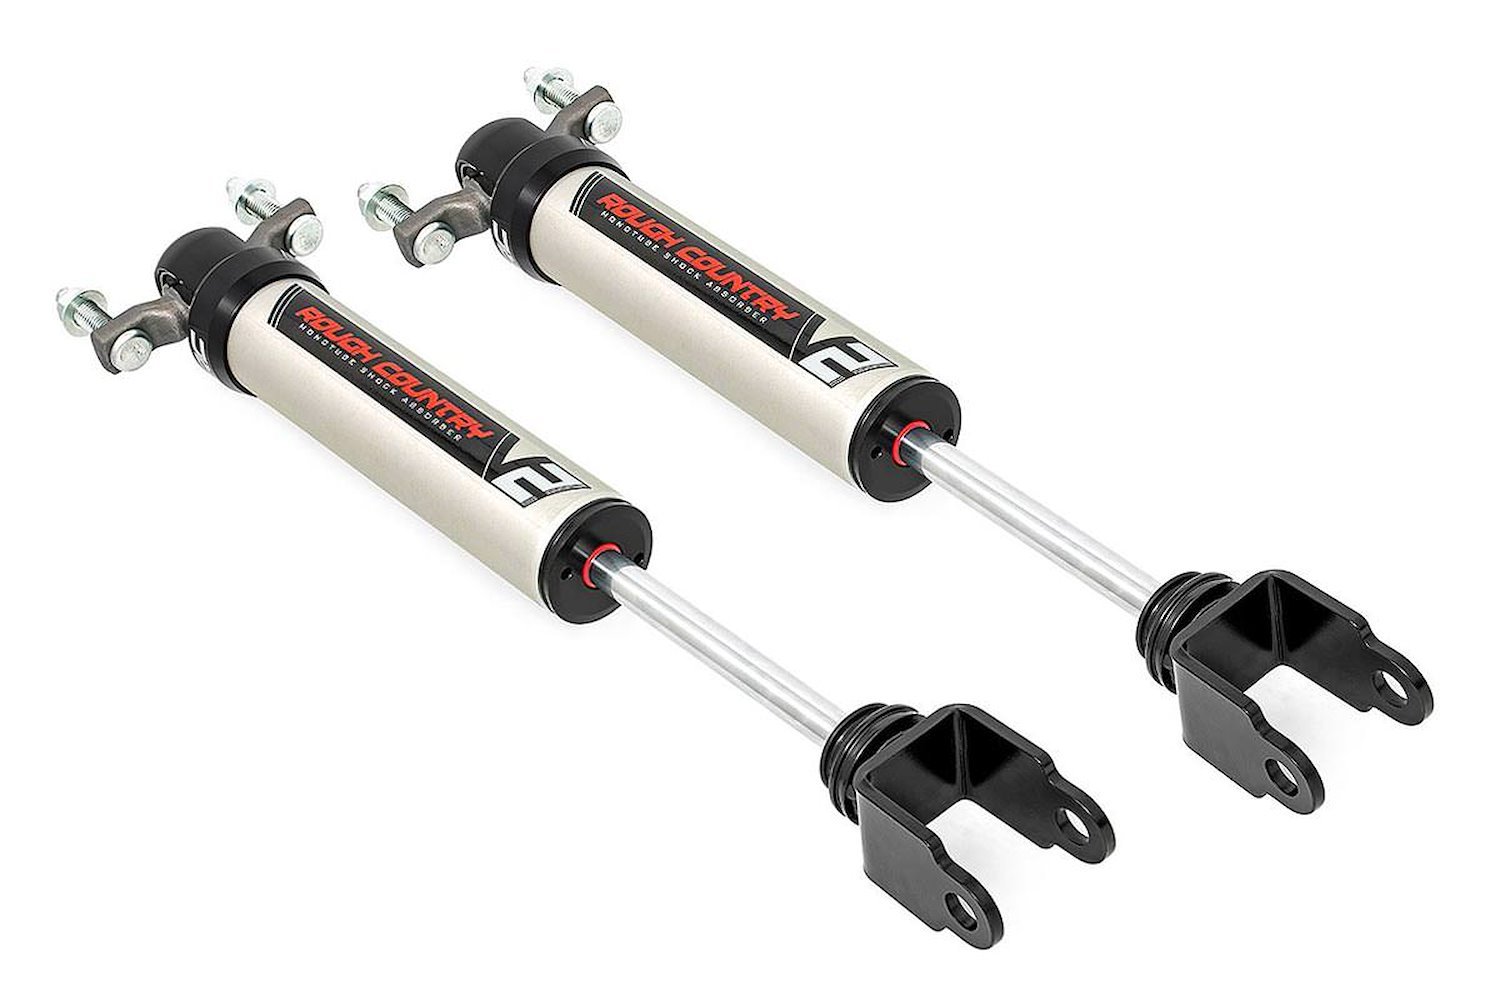 760832_A V2 Front Shocks, 2.5-3", Fits Select Chevy/GMC 2500HD/3500HD